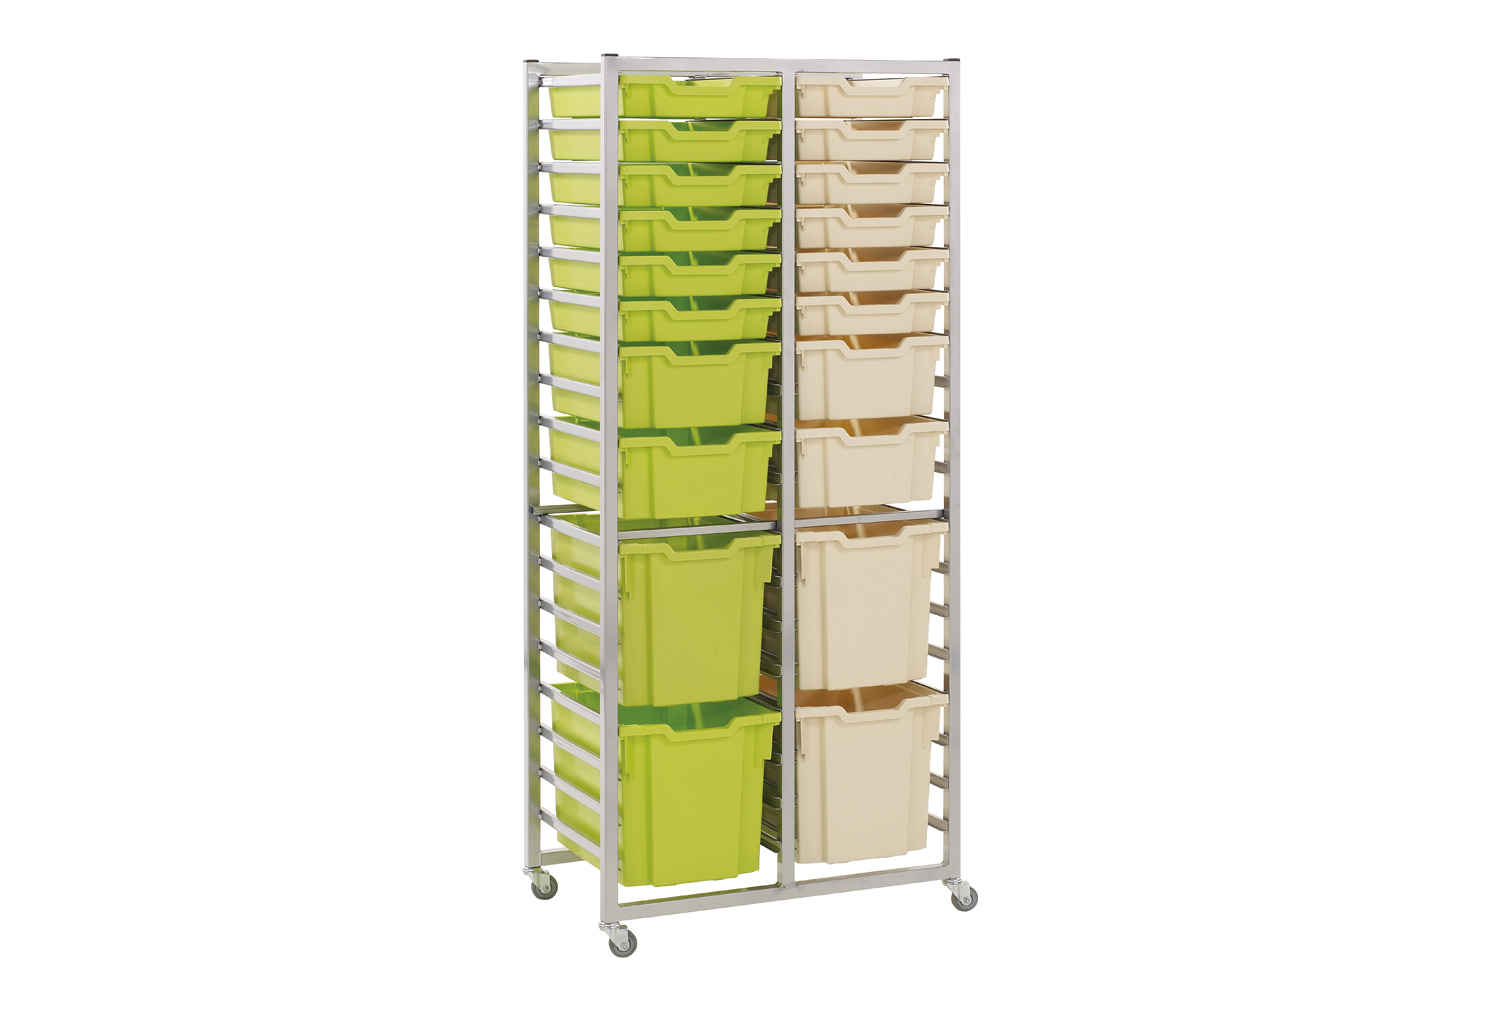 Metalliform Double Column Metal Classroom Tray Storage Unit Only (Holds 36 Standard Classroom Trays), Ailsa